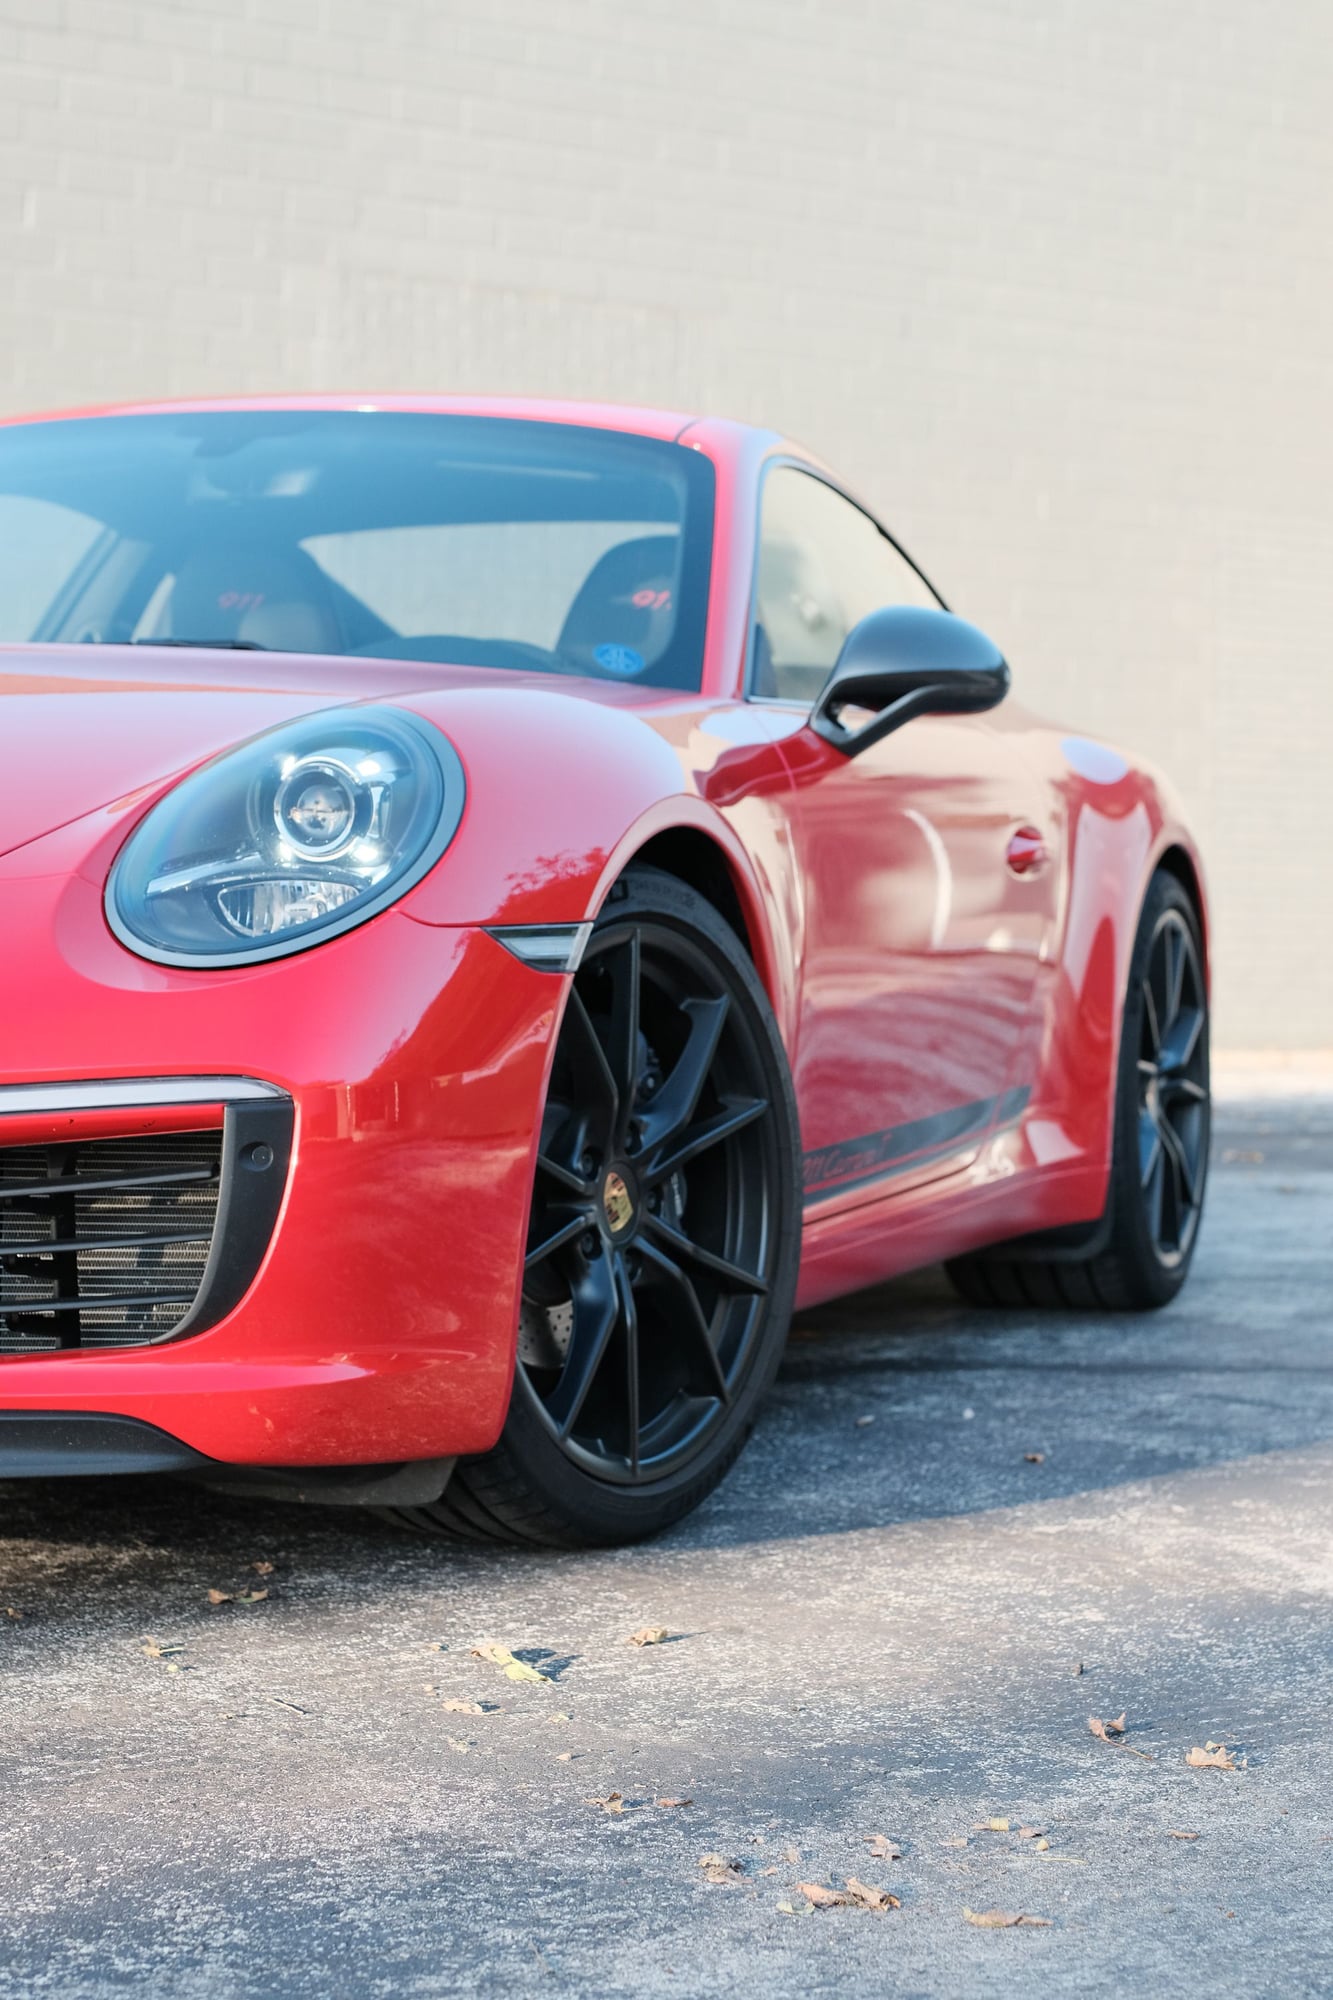 2018 Porsche 911 - FS: 2018 911 Carrera T - GR, 7spd, LWB, RAS, T int, Bose - Used - VIN WP0AA2A98JS106390 - 8,075 Miles - 6 cyl - 2WD - Manual - Coupe - Red - Des Moines, IA 50312, United States